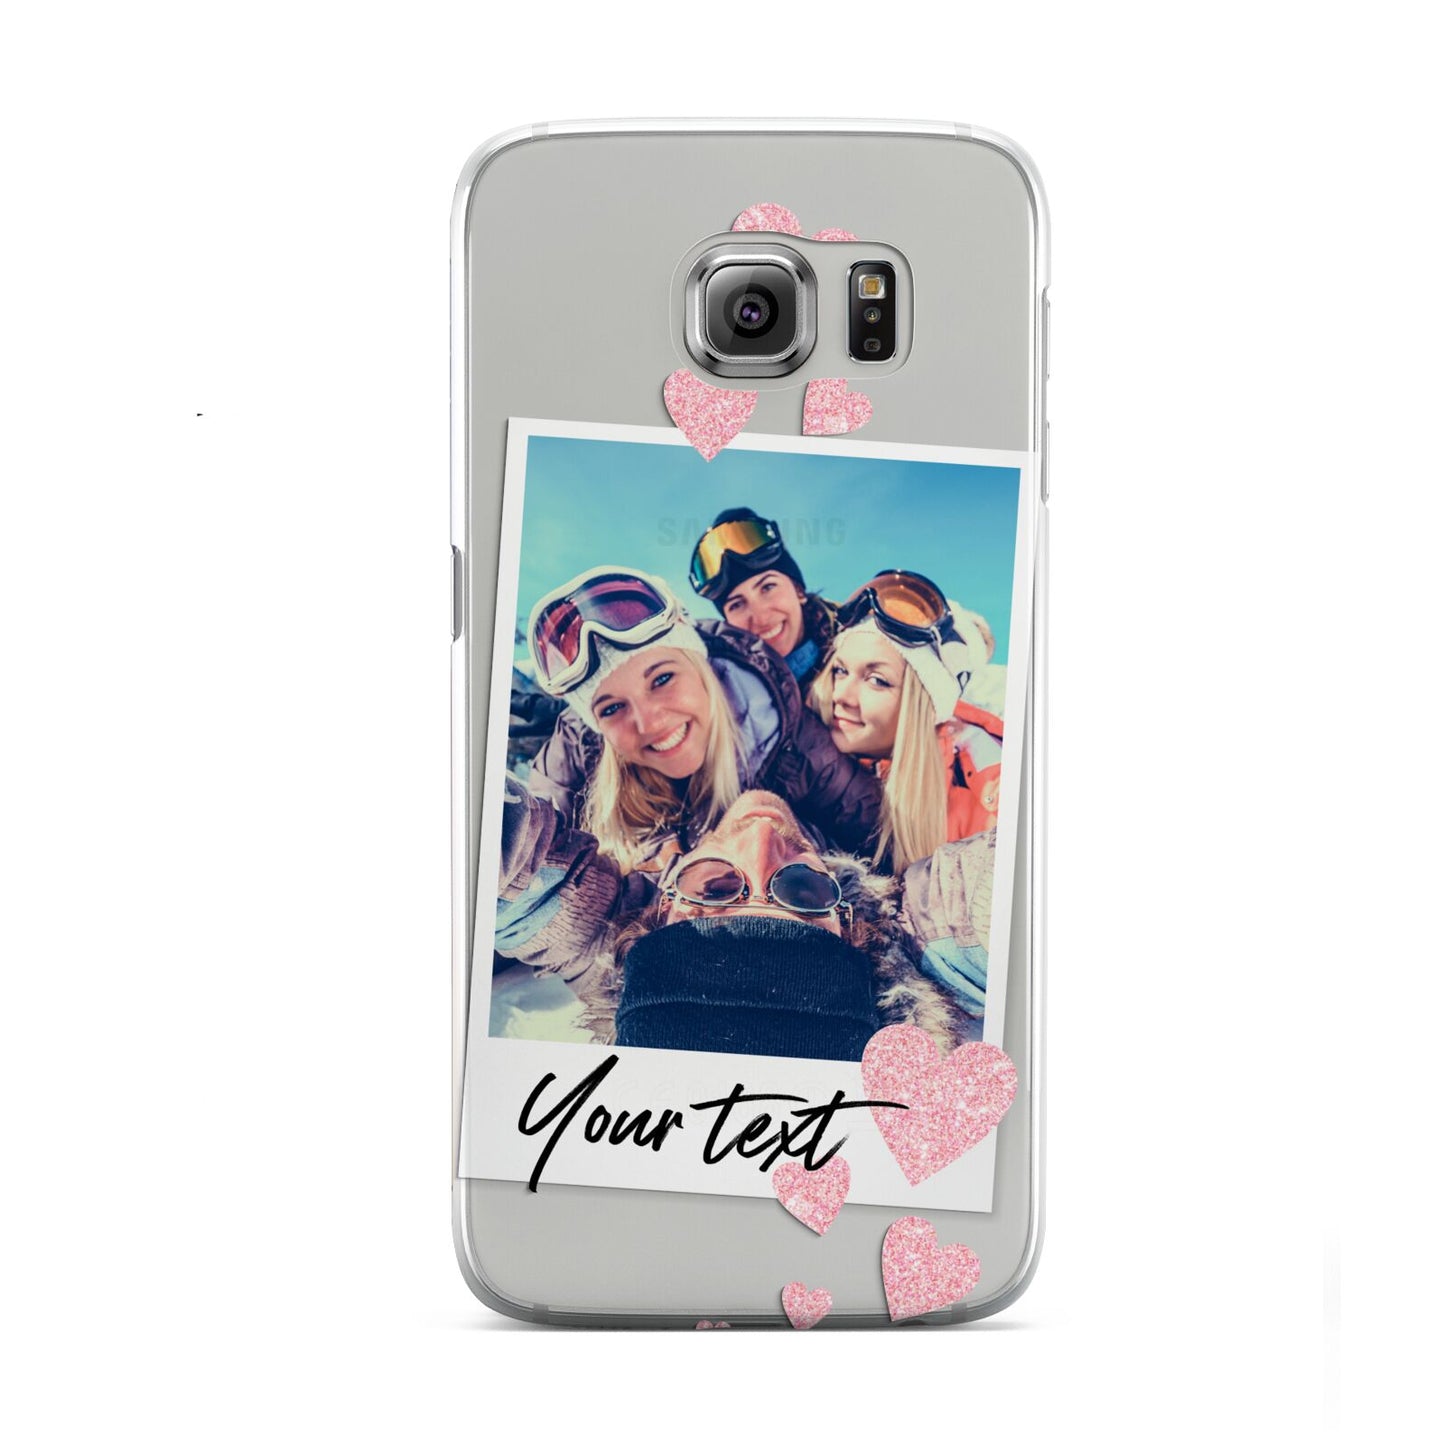 Photo with Text Samsung Galaxy S6 Case